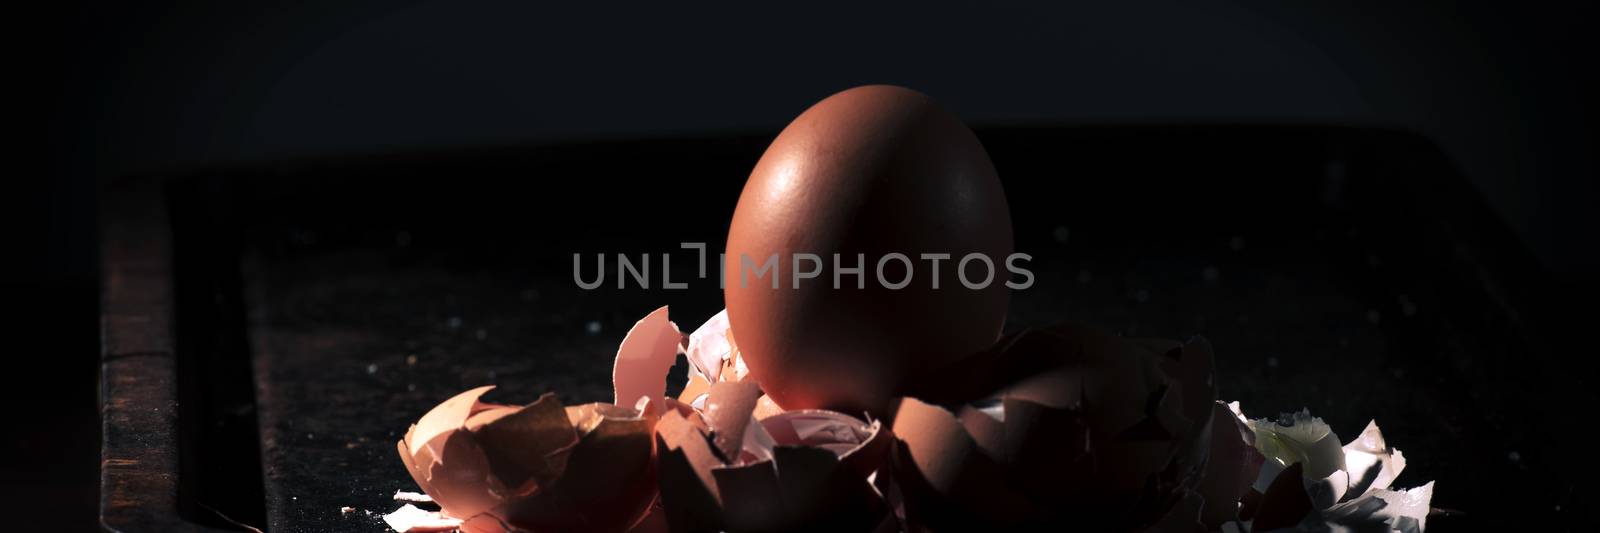 Low light with high contrast lighting of a bunch of eggs whole and crushed shells.